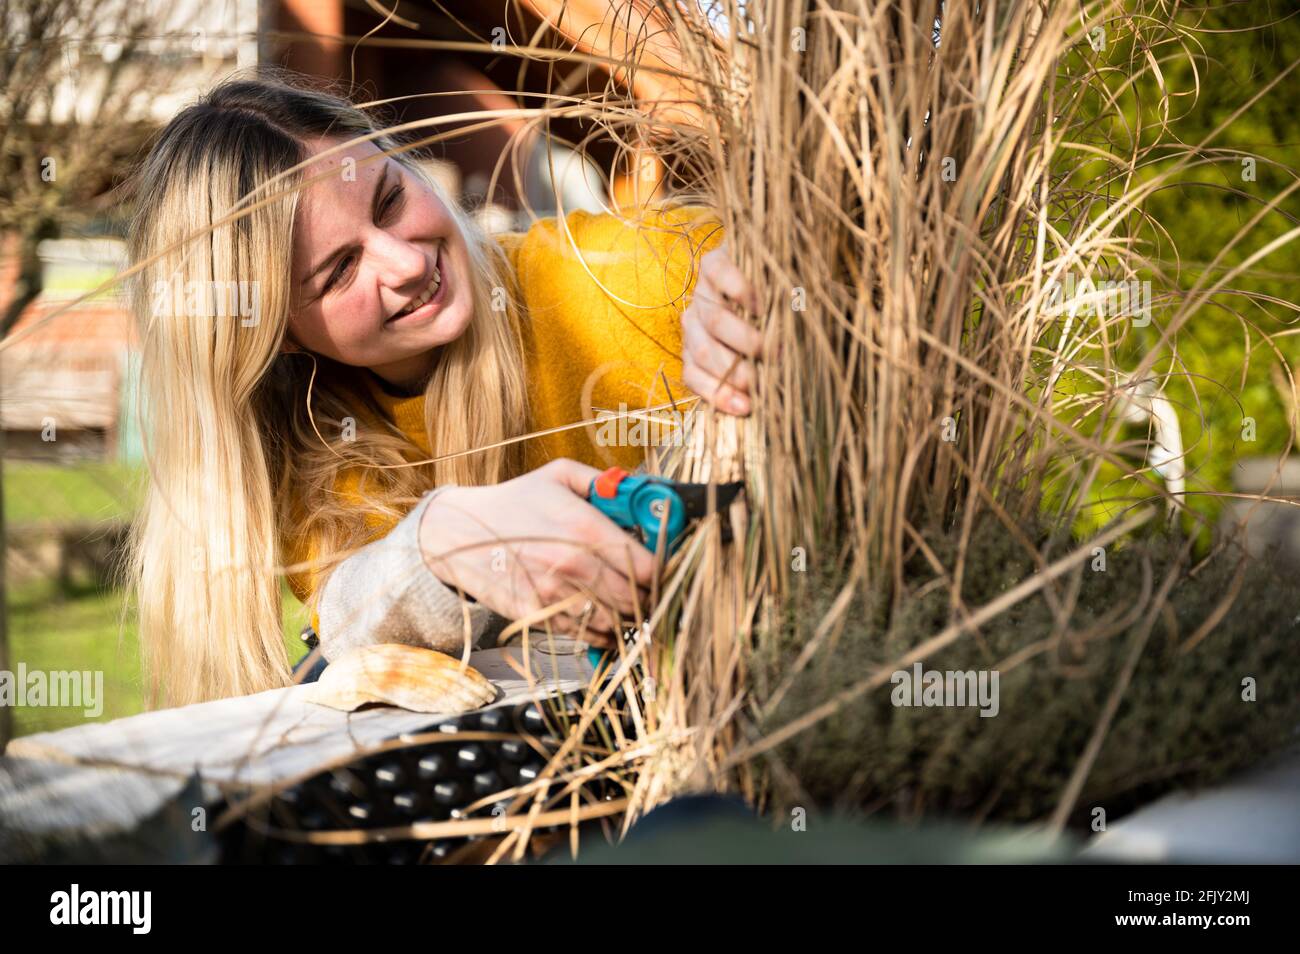 Young blonde woman cutting back Zebra grass (Miscanthus sinensis zebrinus), or porcupine grass in the garden Stock Photo